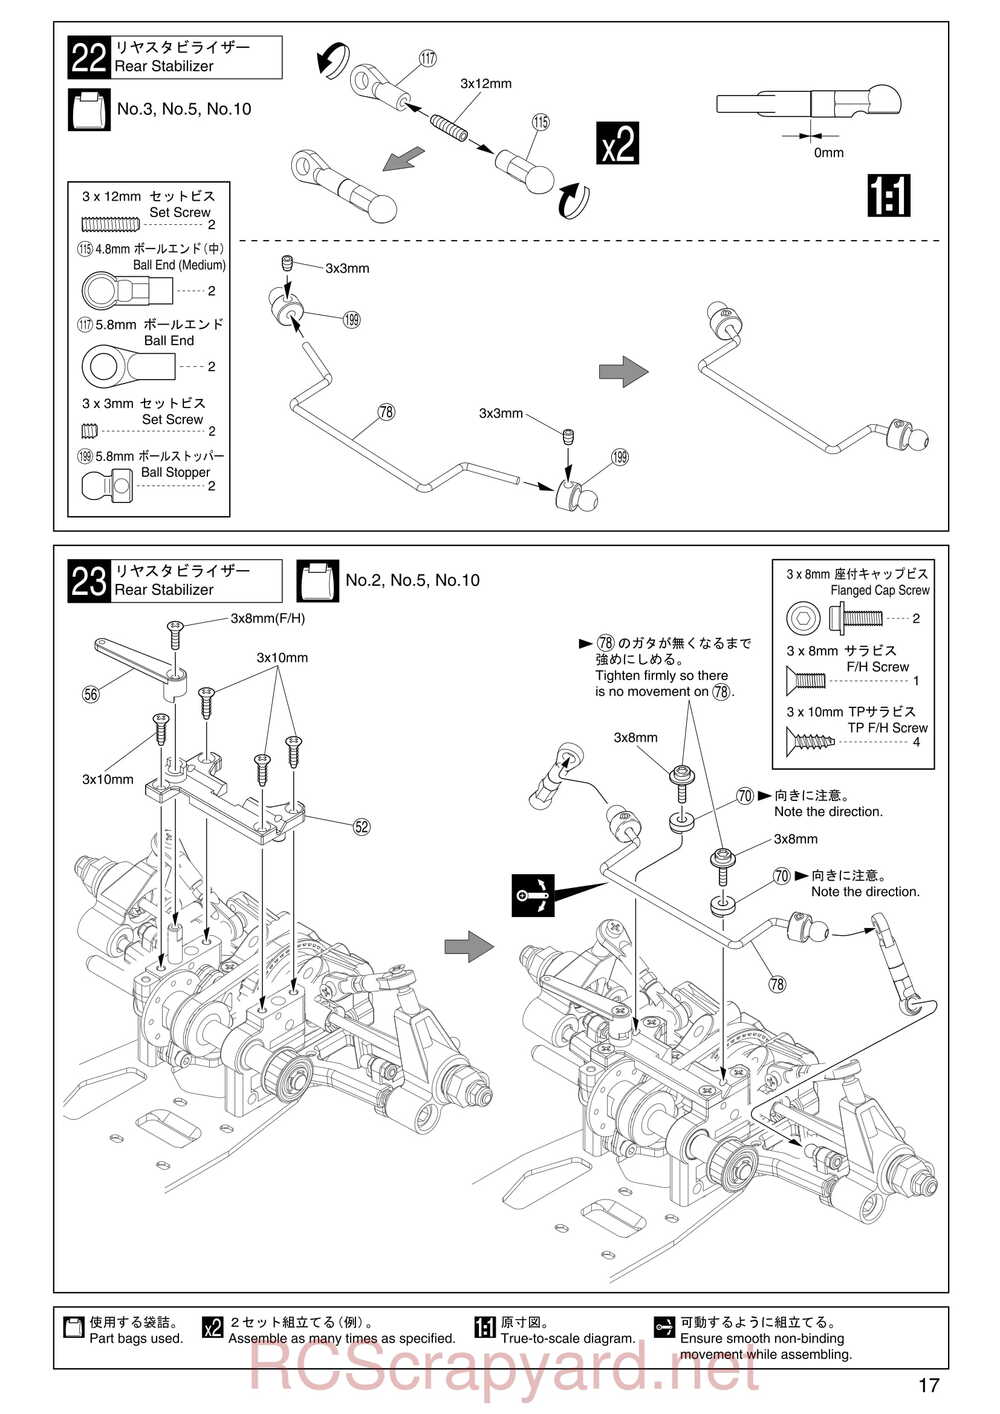 Kyosho - 31257 - V-One RRR Rubber - Manual - Page 17